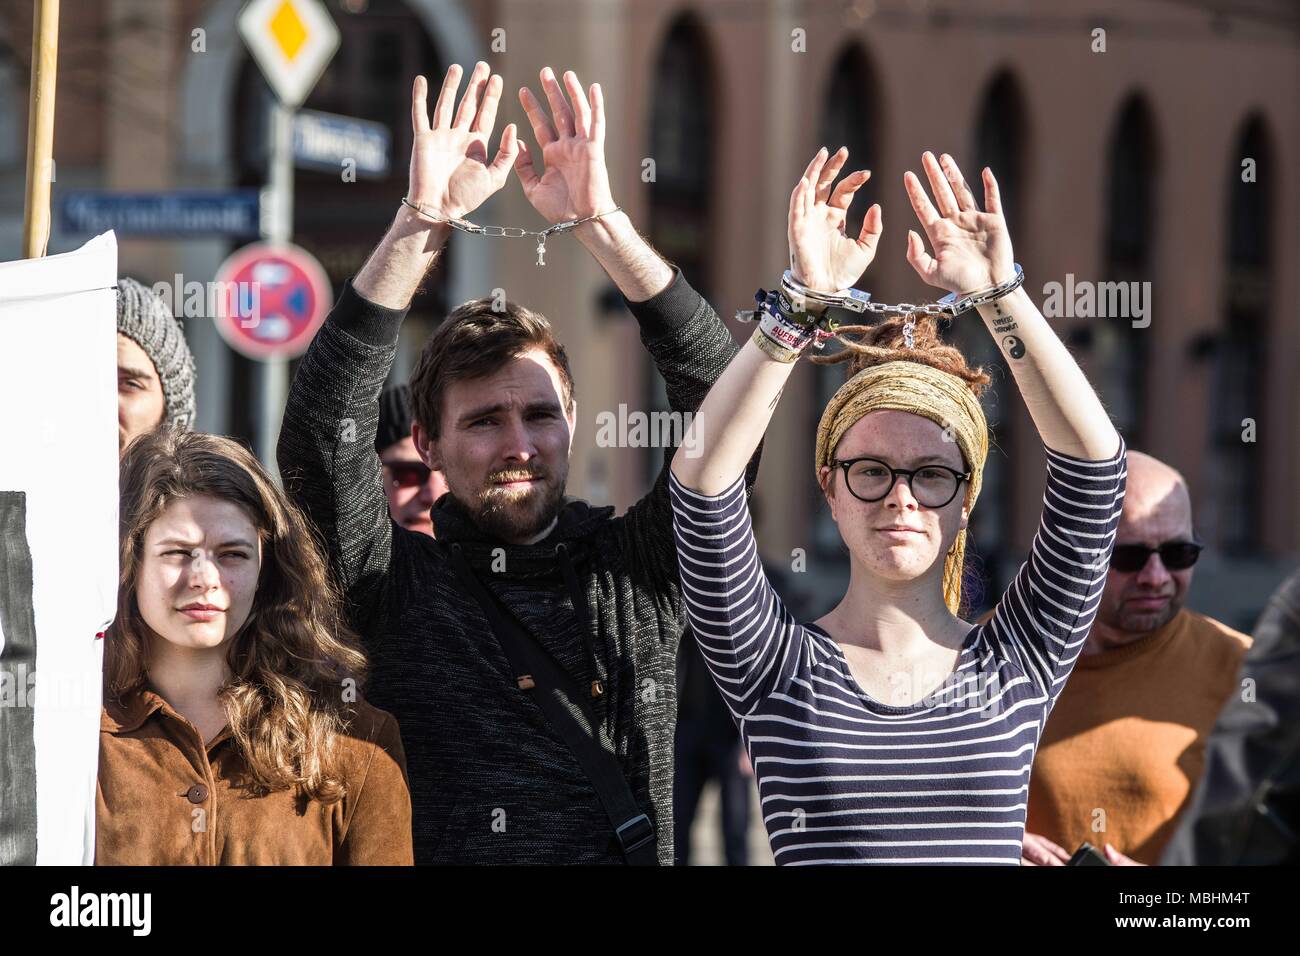 Munich, Bavaria, Germany. 11th Apr, 2018. Protesters schackled themselves in handcuffs in protest of the potential ''Generalverdacht'' (general suspicion) the PAG may put many under. The Green Party Youth (Gruene Jugend) of Munich, along with 120 members of the SPD, JuSos, Mut Bayern, and die Linke demonstrated against the forthcoming PAG, Police Assignment Laws that give police in Bavaria sweeping secret police-like powers that are alleged to be threats to Germany's model democracy. The CSU party claims the PAG is to protect democracy. Credit: ZUMA Press, Inc./Alamy Live News Stock Photo